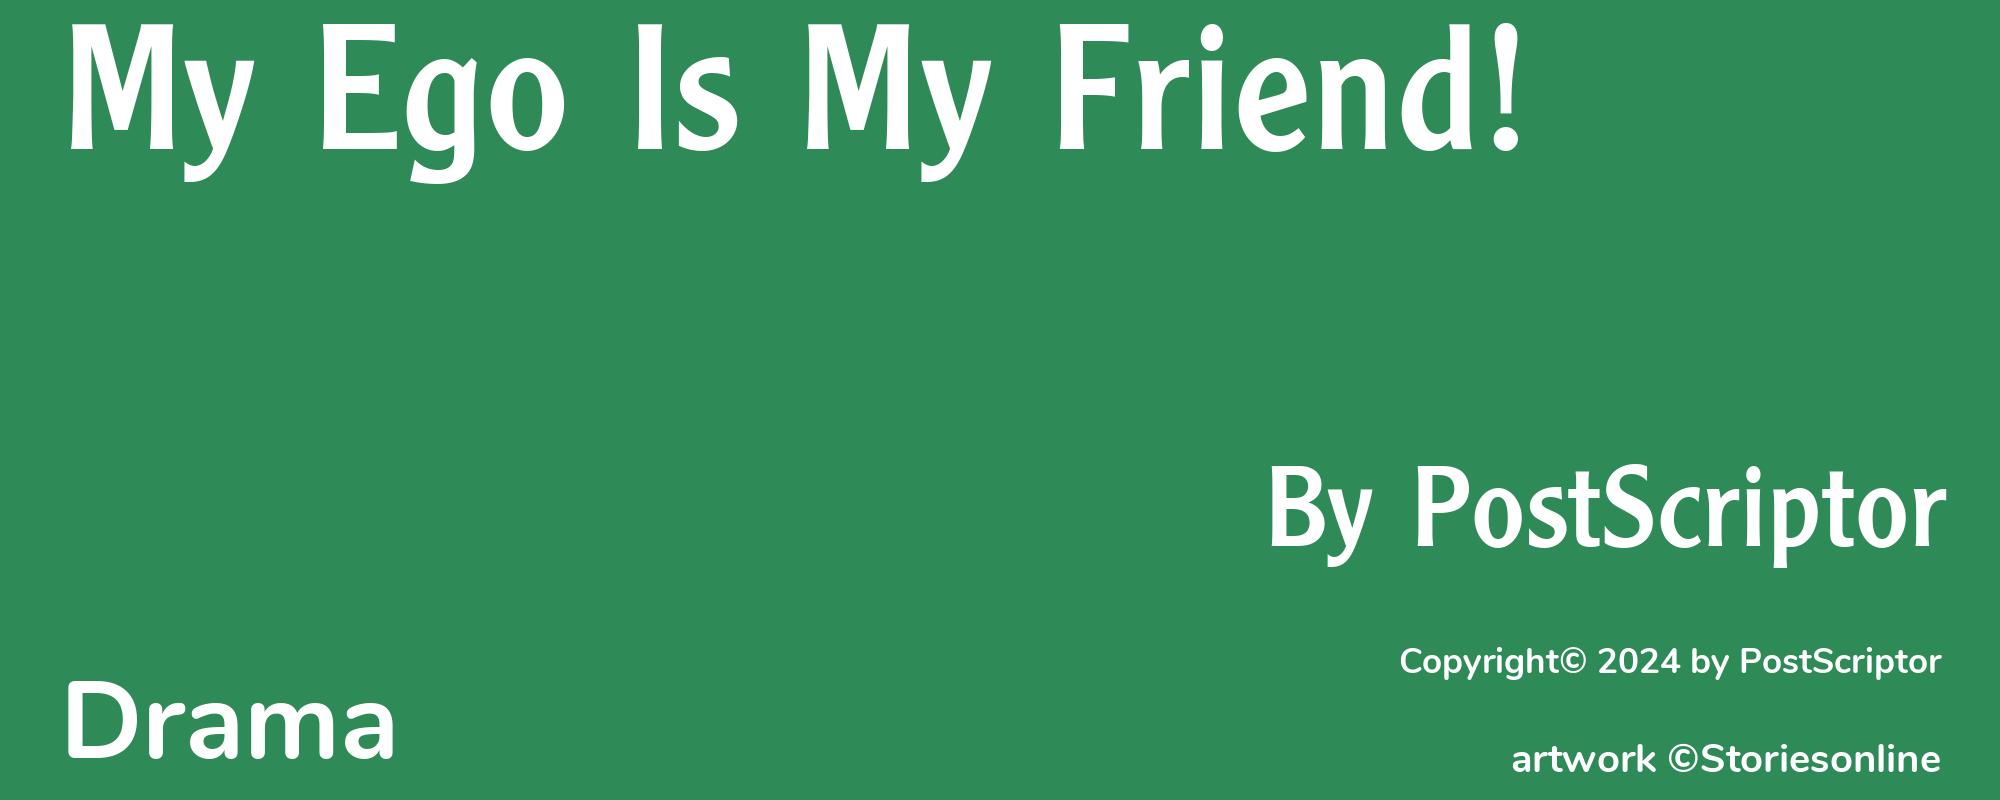 My Ego Is My Friend! - Cover